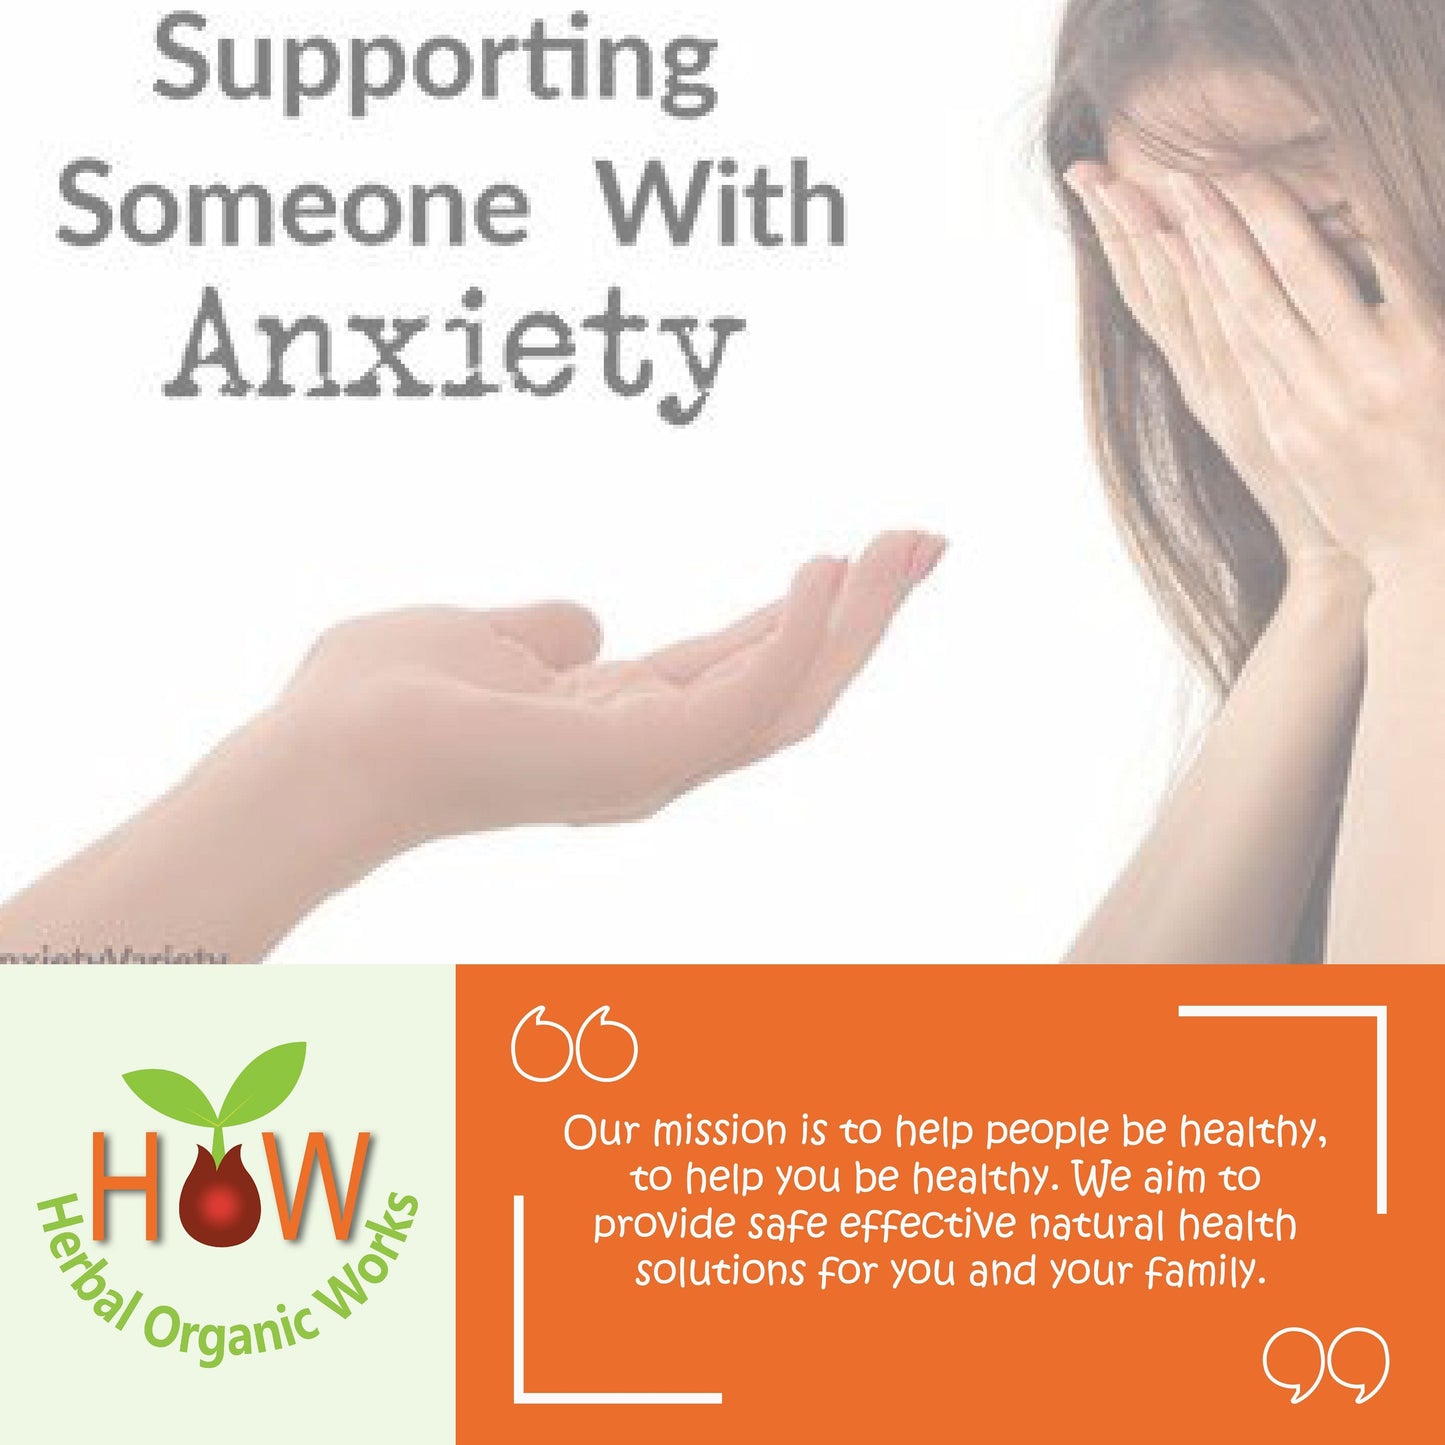 ANXIETY SUPPORT REMEDY (HOW180)